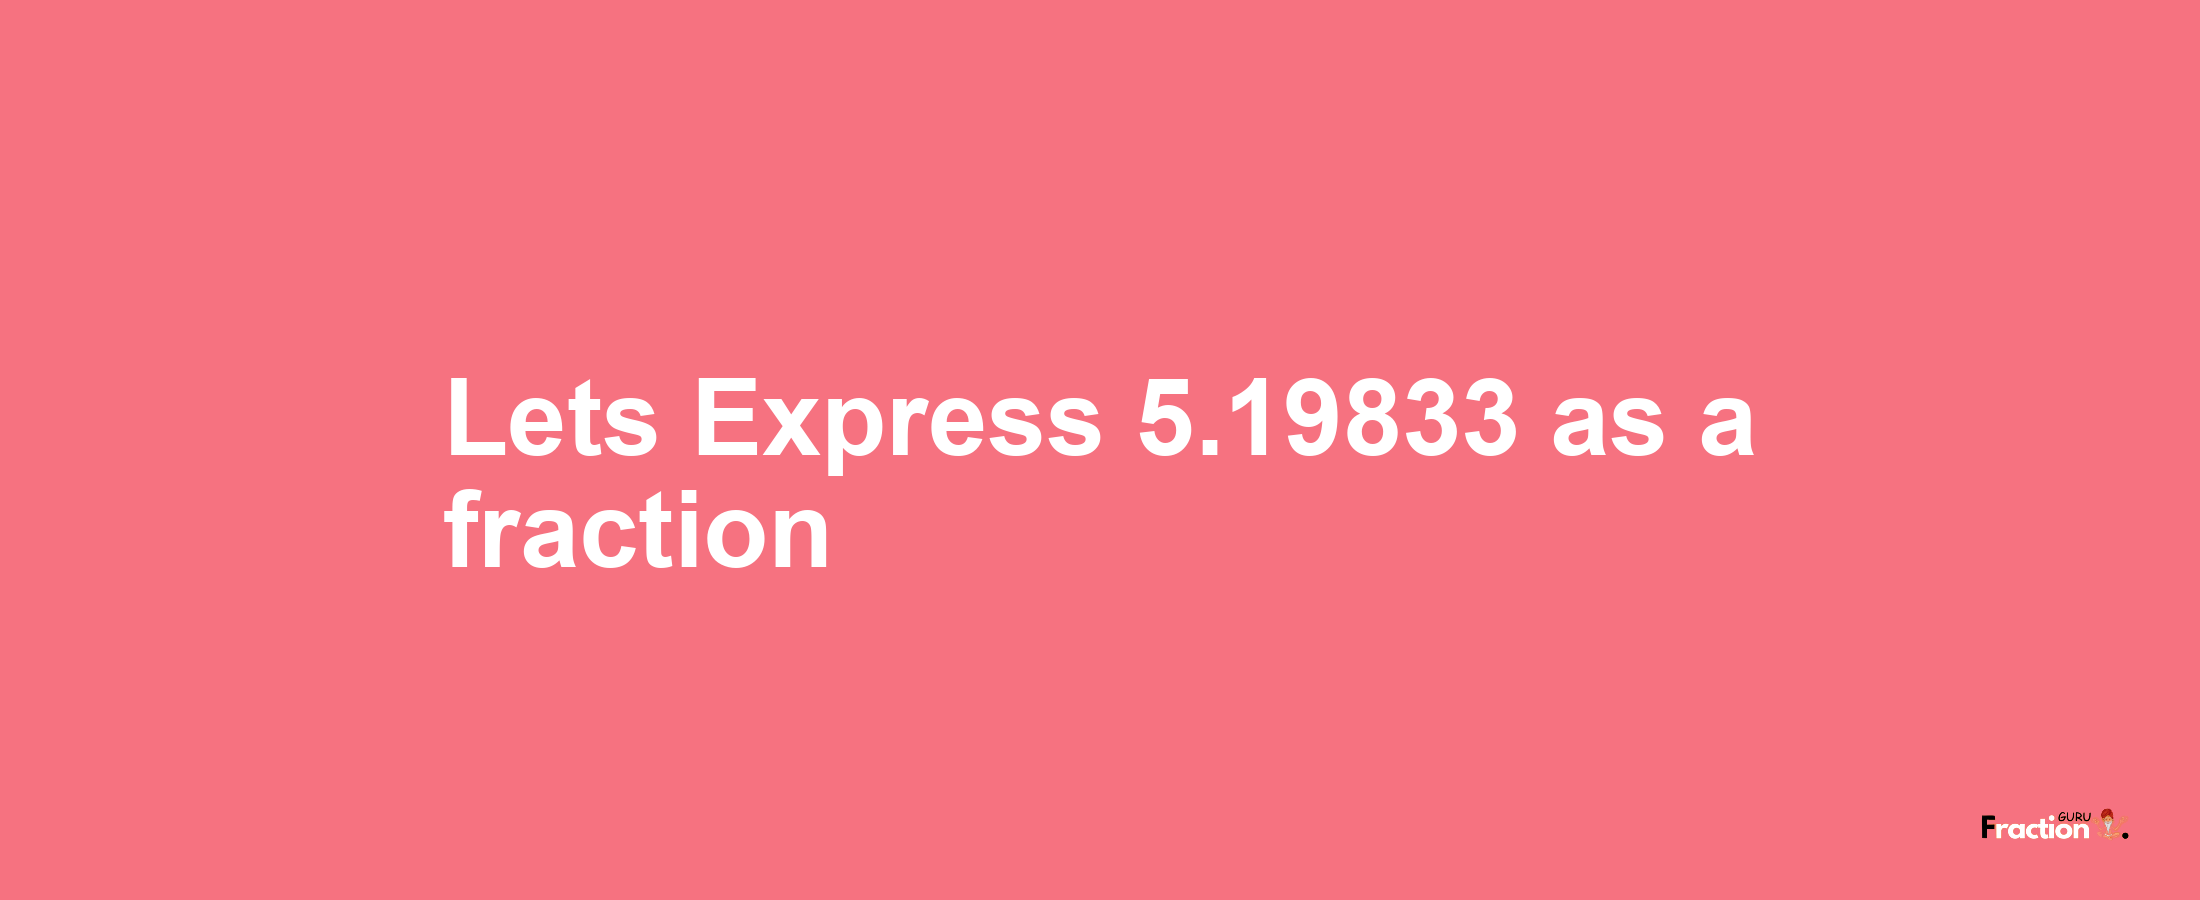 Lets Express 5.19833 as afraction